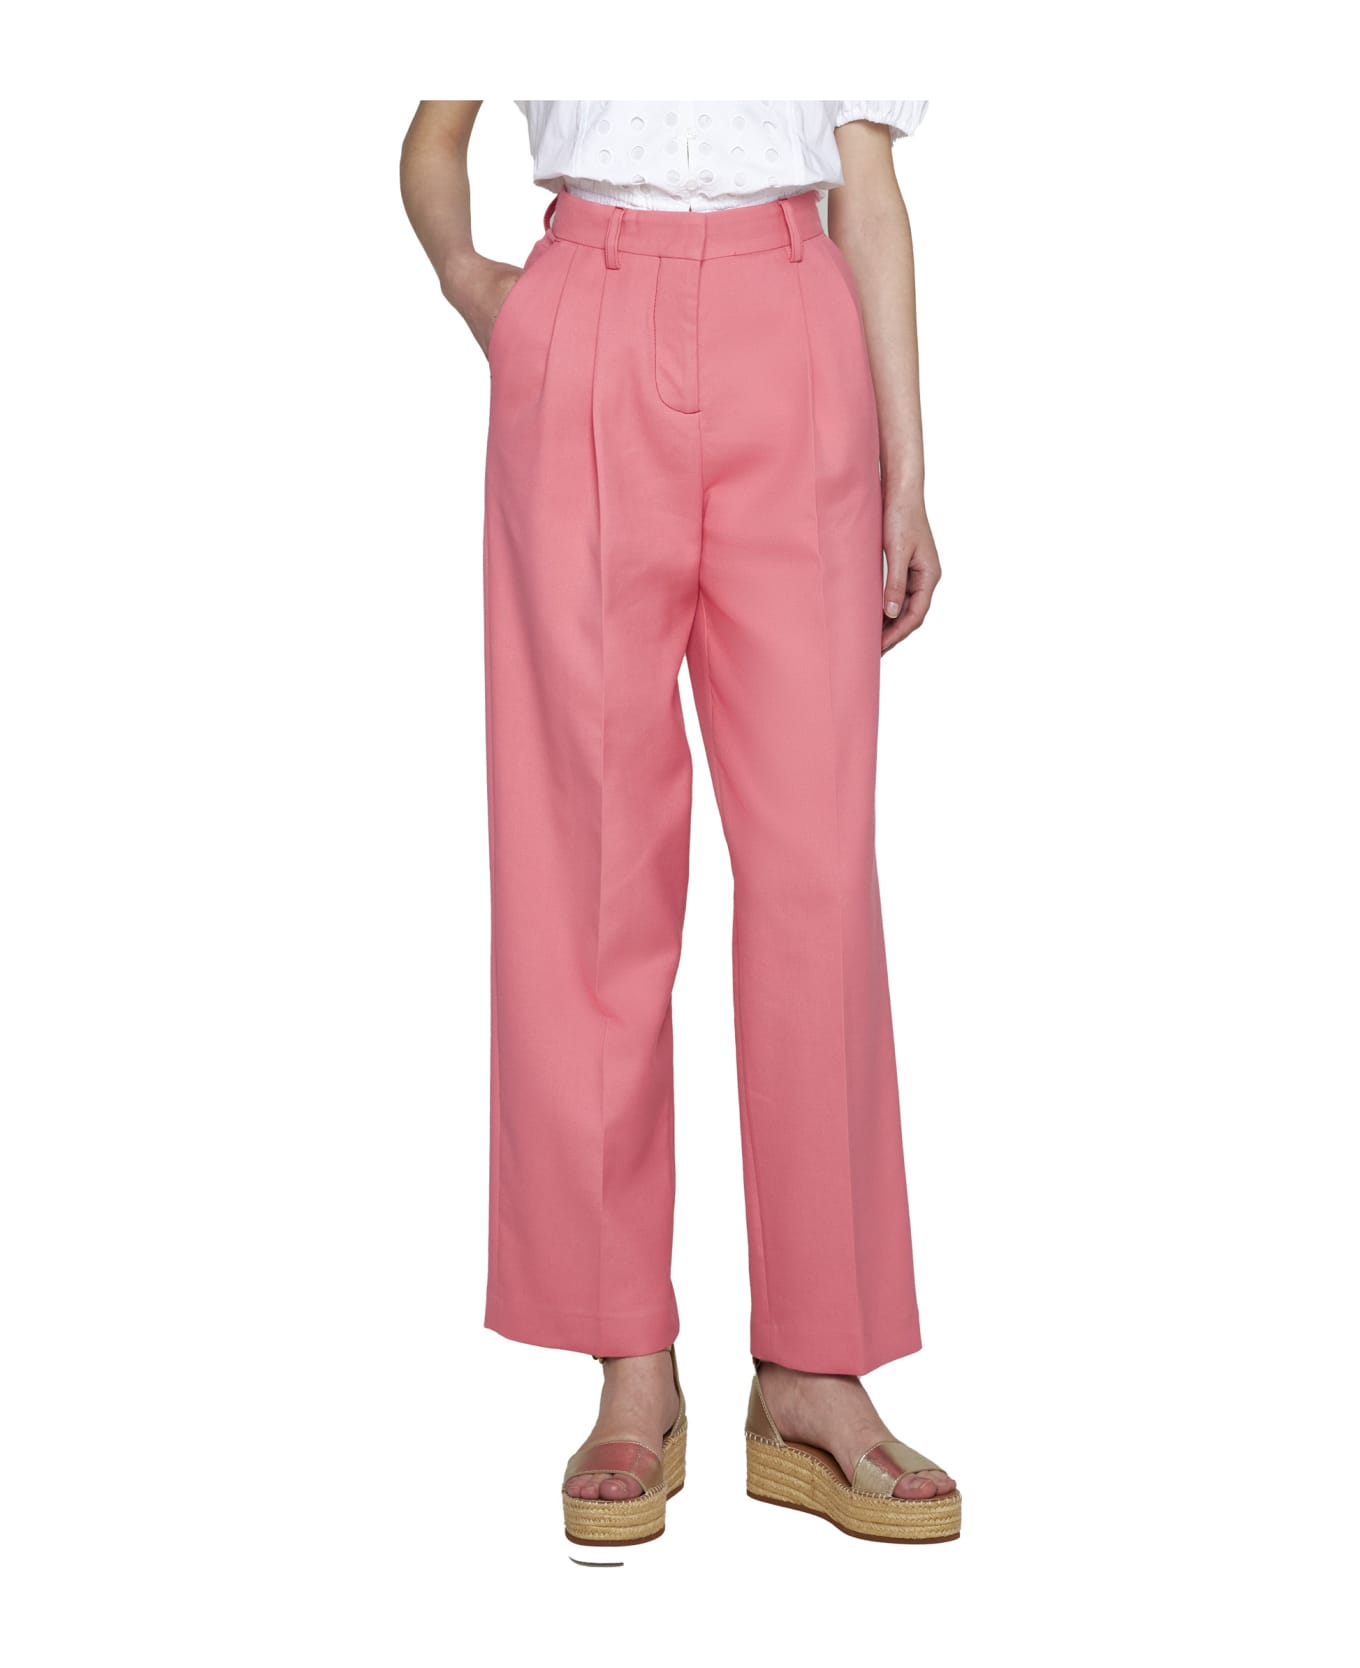 See by Chloé Pants - Sunset pink